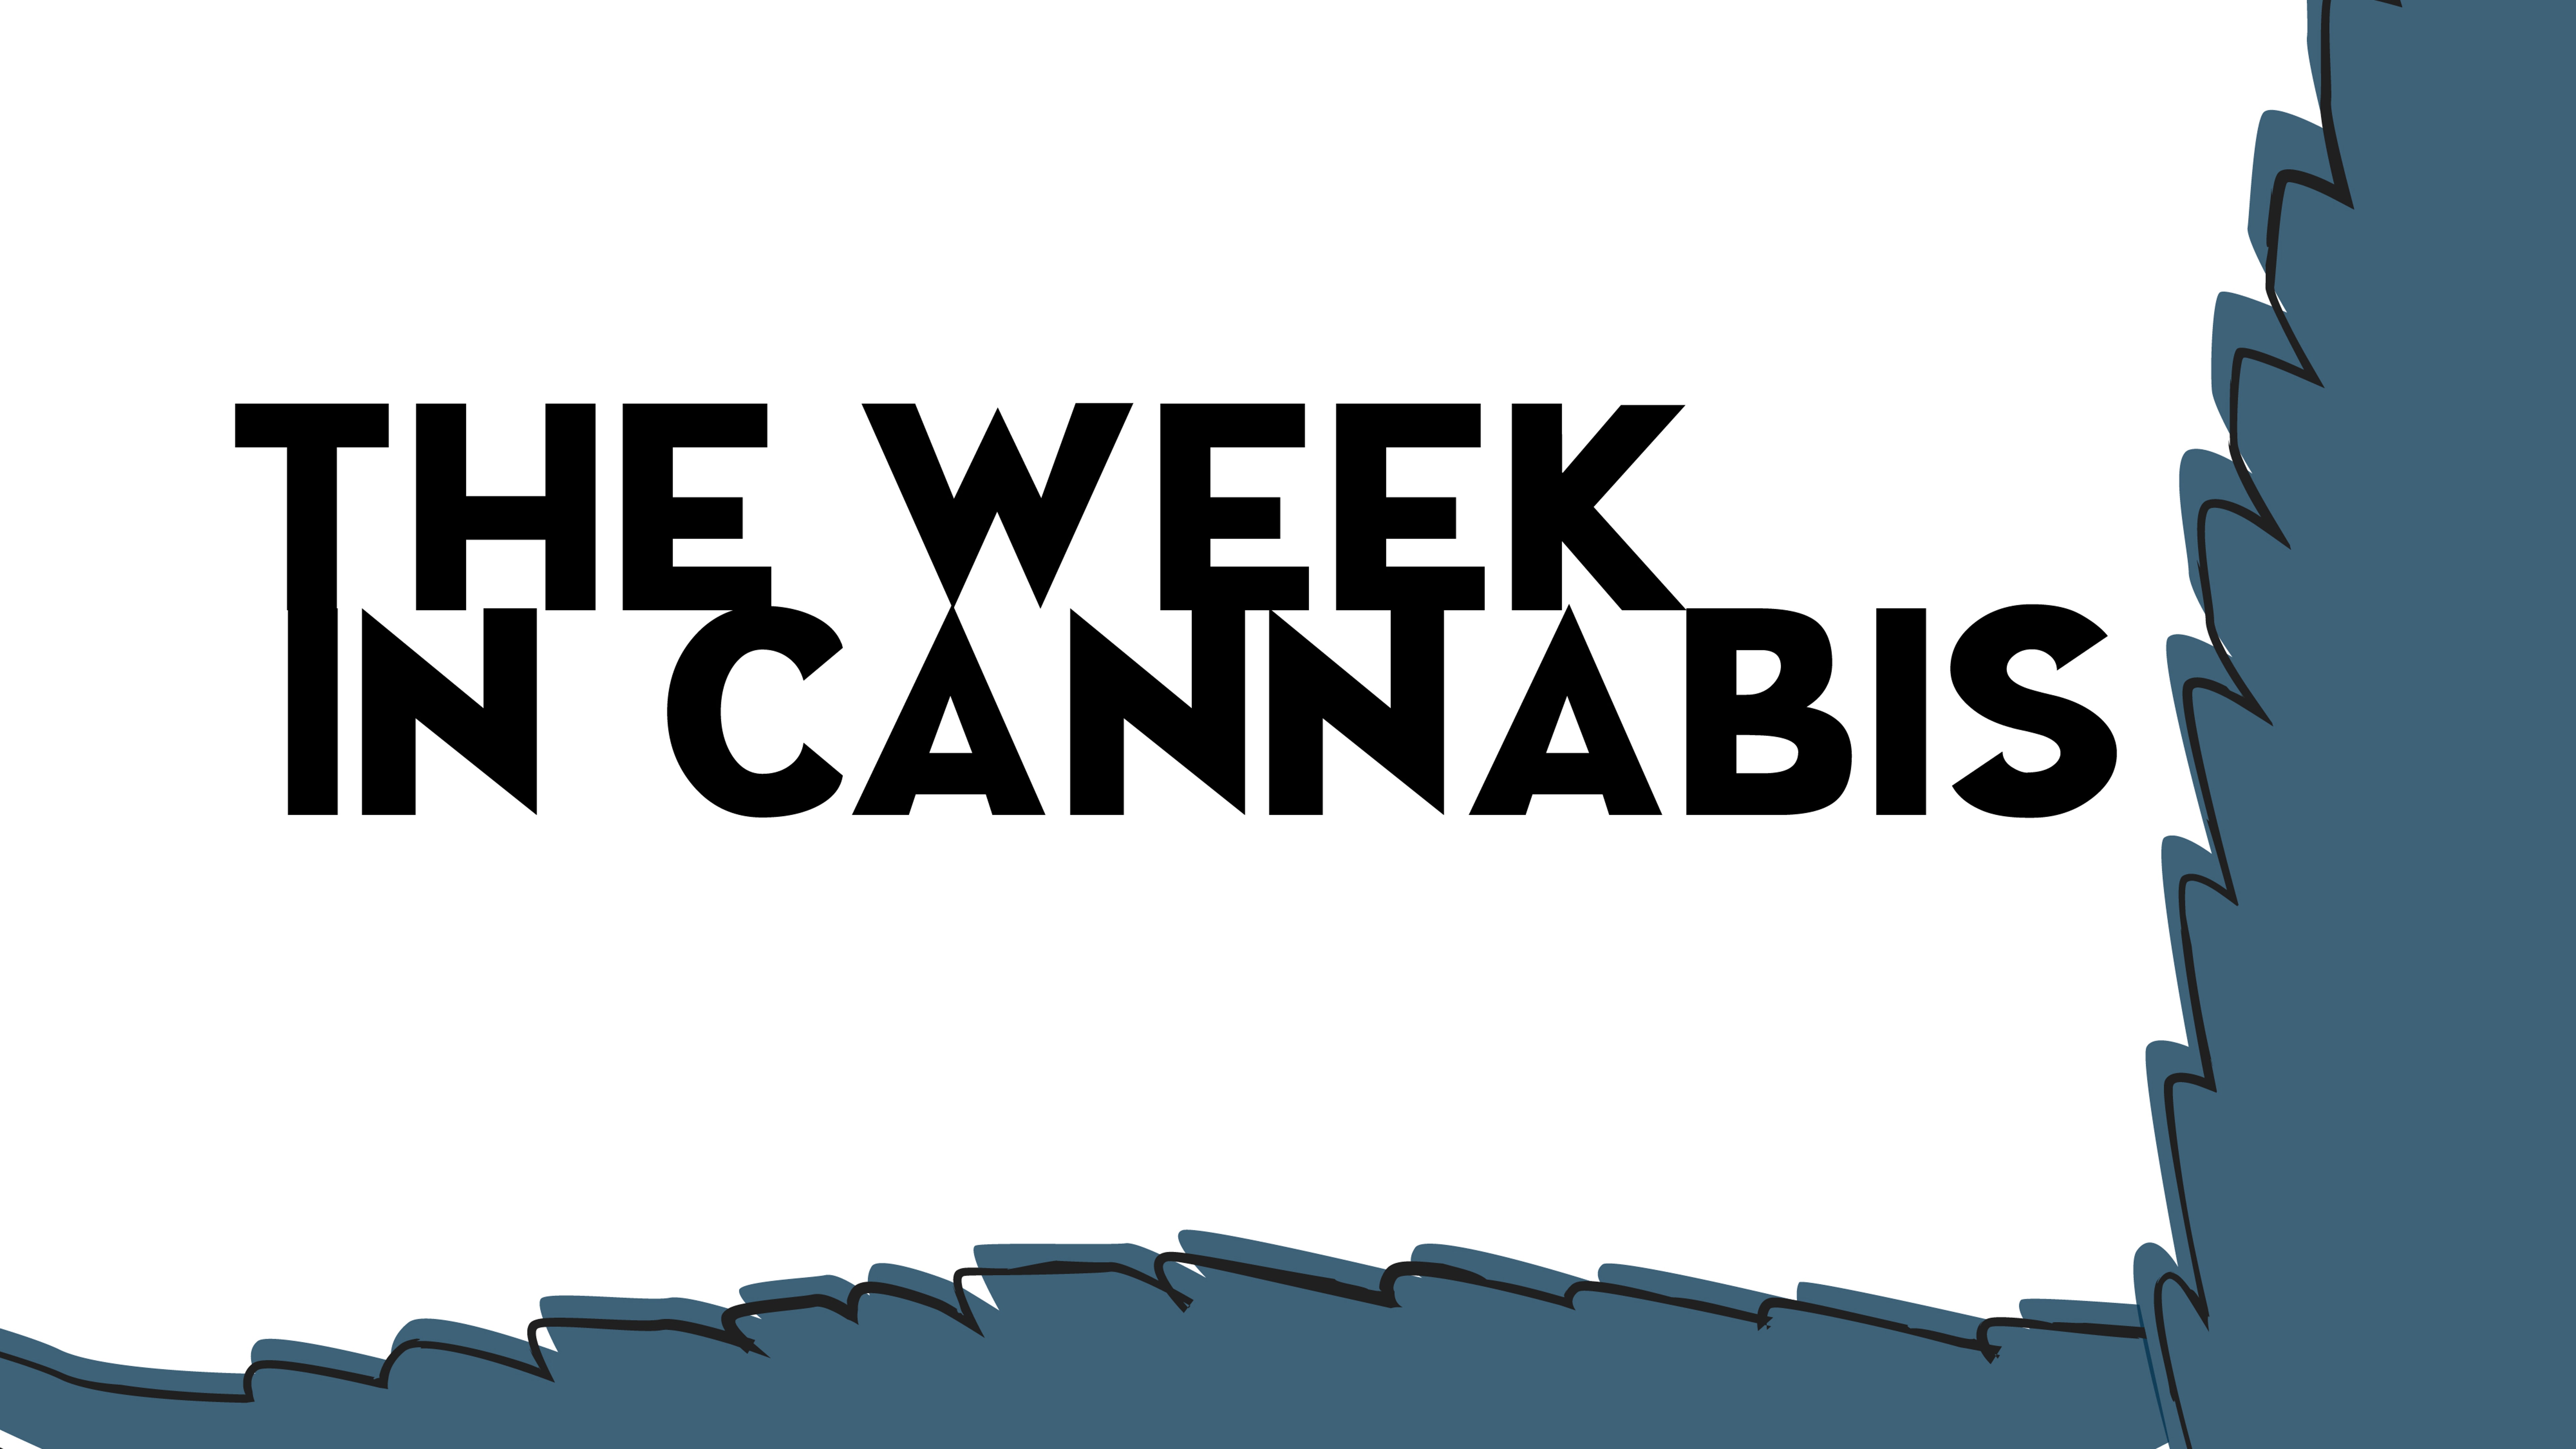 The Week In Cannabis: Schumer&#39;s Bill, The Super Bowl, Leafly, Canopy Growth, Tilray, Hexo, Sundial And More